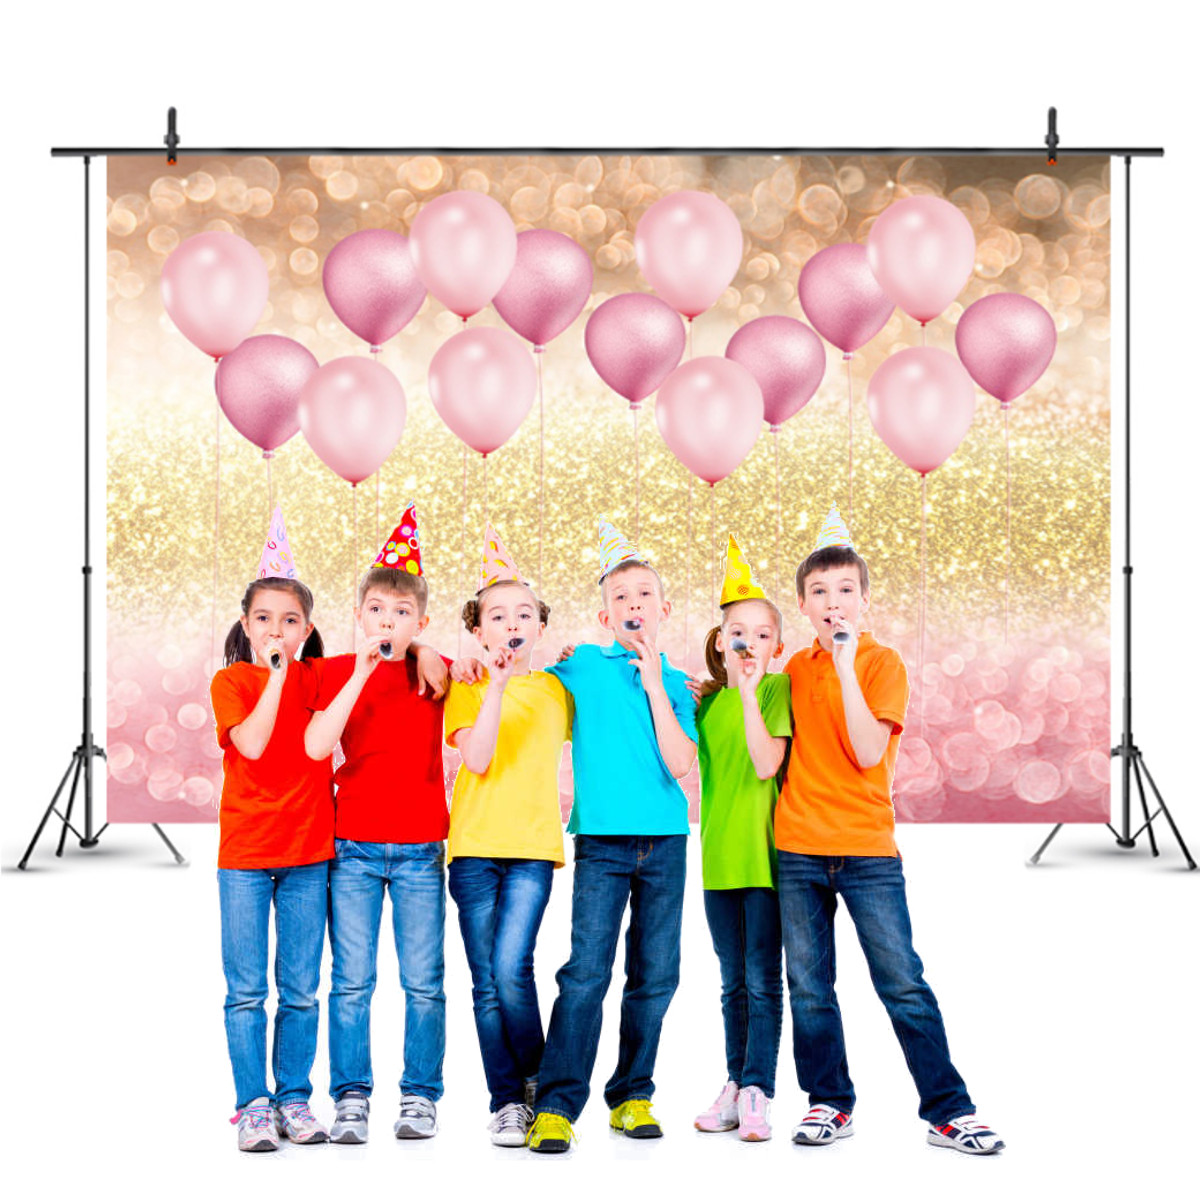 Little-Baby-Birthday-Party-Theme-Backdrops-Photography-Photo-Booth-Studio-Background-Party-Home-Deco-1748939-1